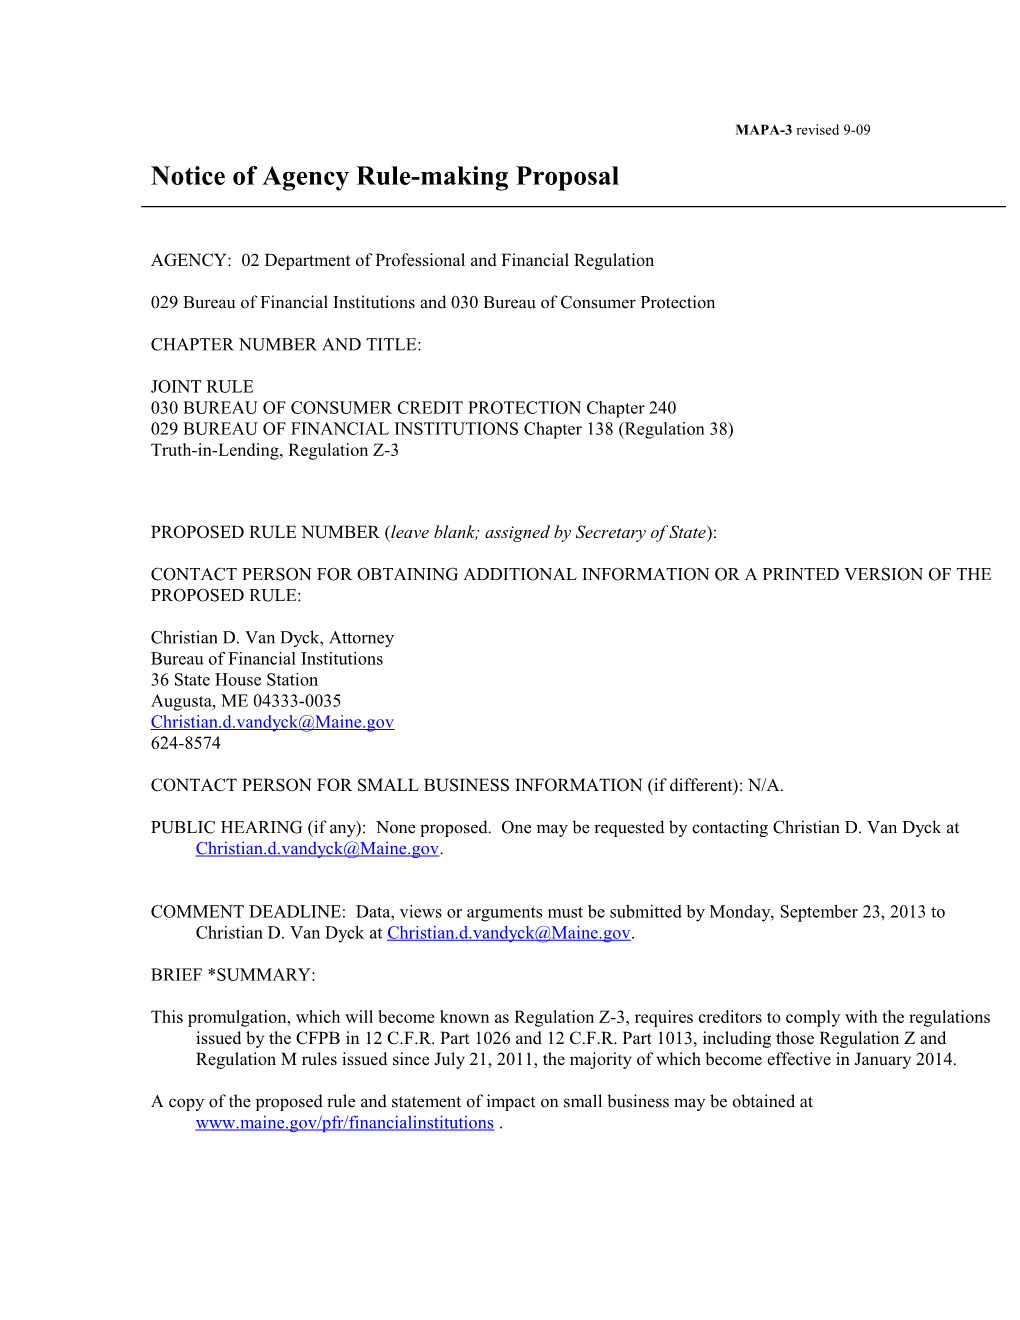 Notice of Agency Rule-Making Proposal